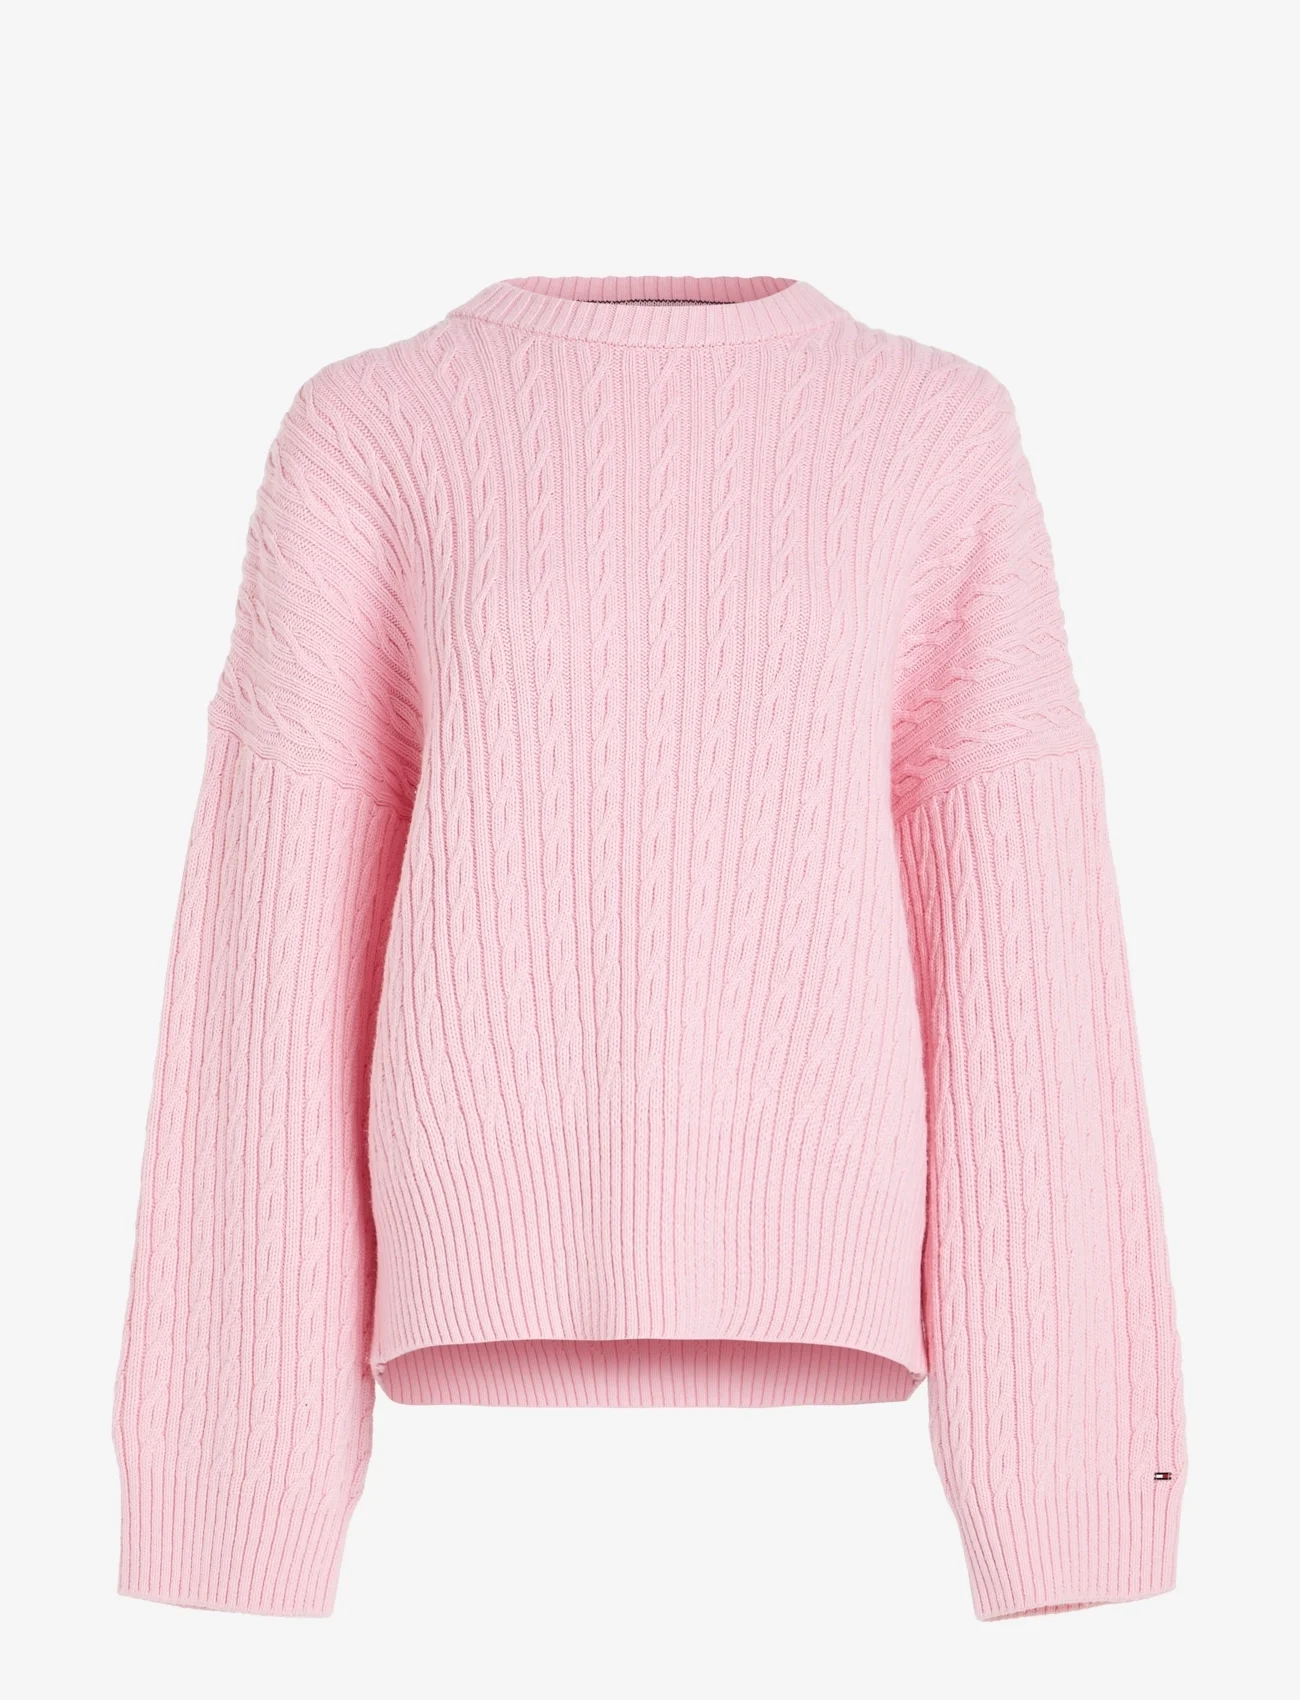 Tommy Hilfiger - CABLE ALL OVER C-NK SWEATER - gebreide truien - iconic pink - 0